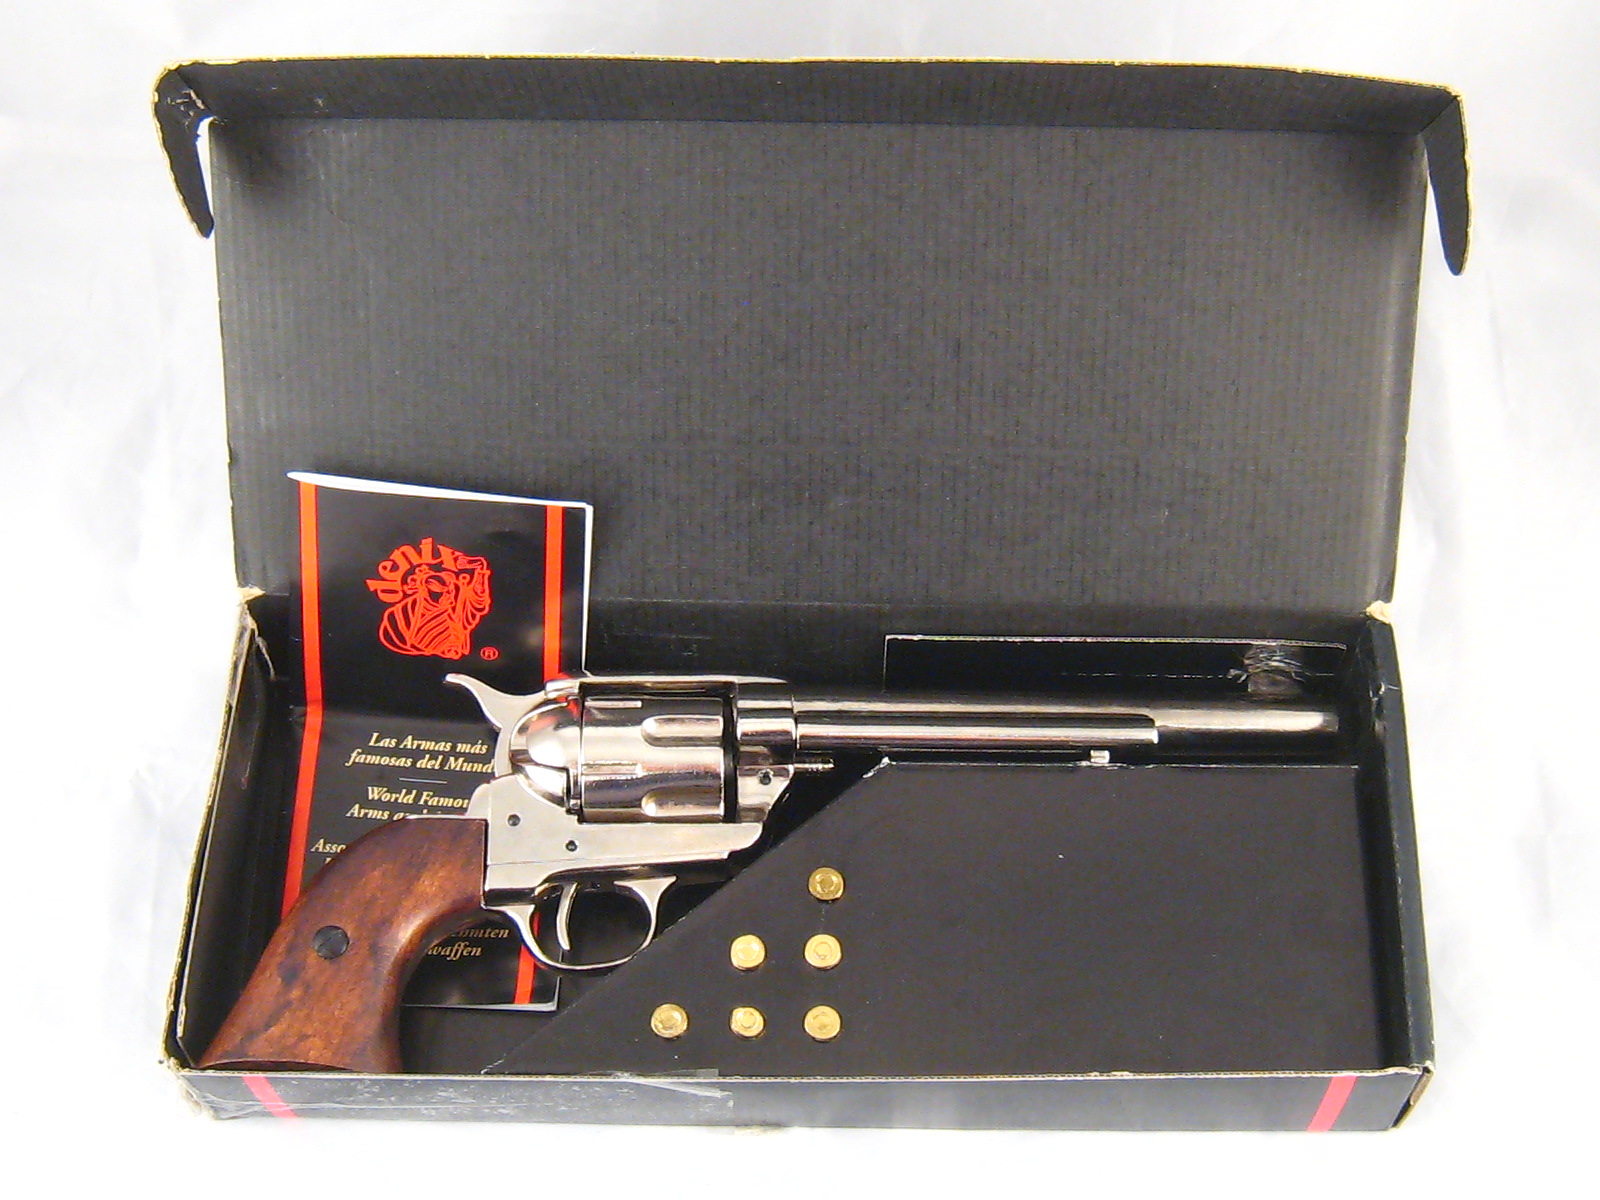 A reproduction Colt .45 pistol by Denix with box and leaflet.